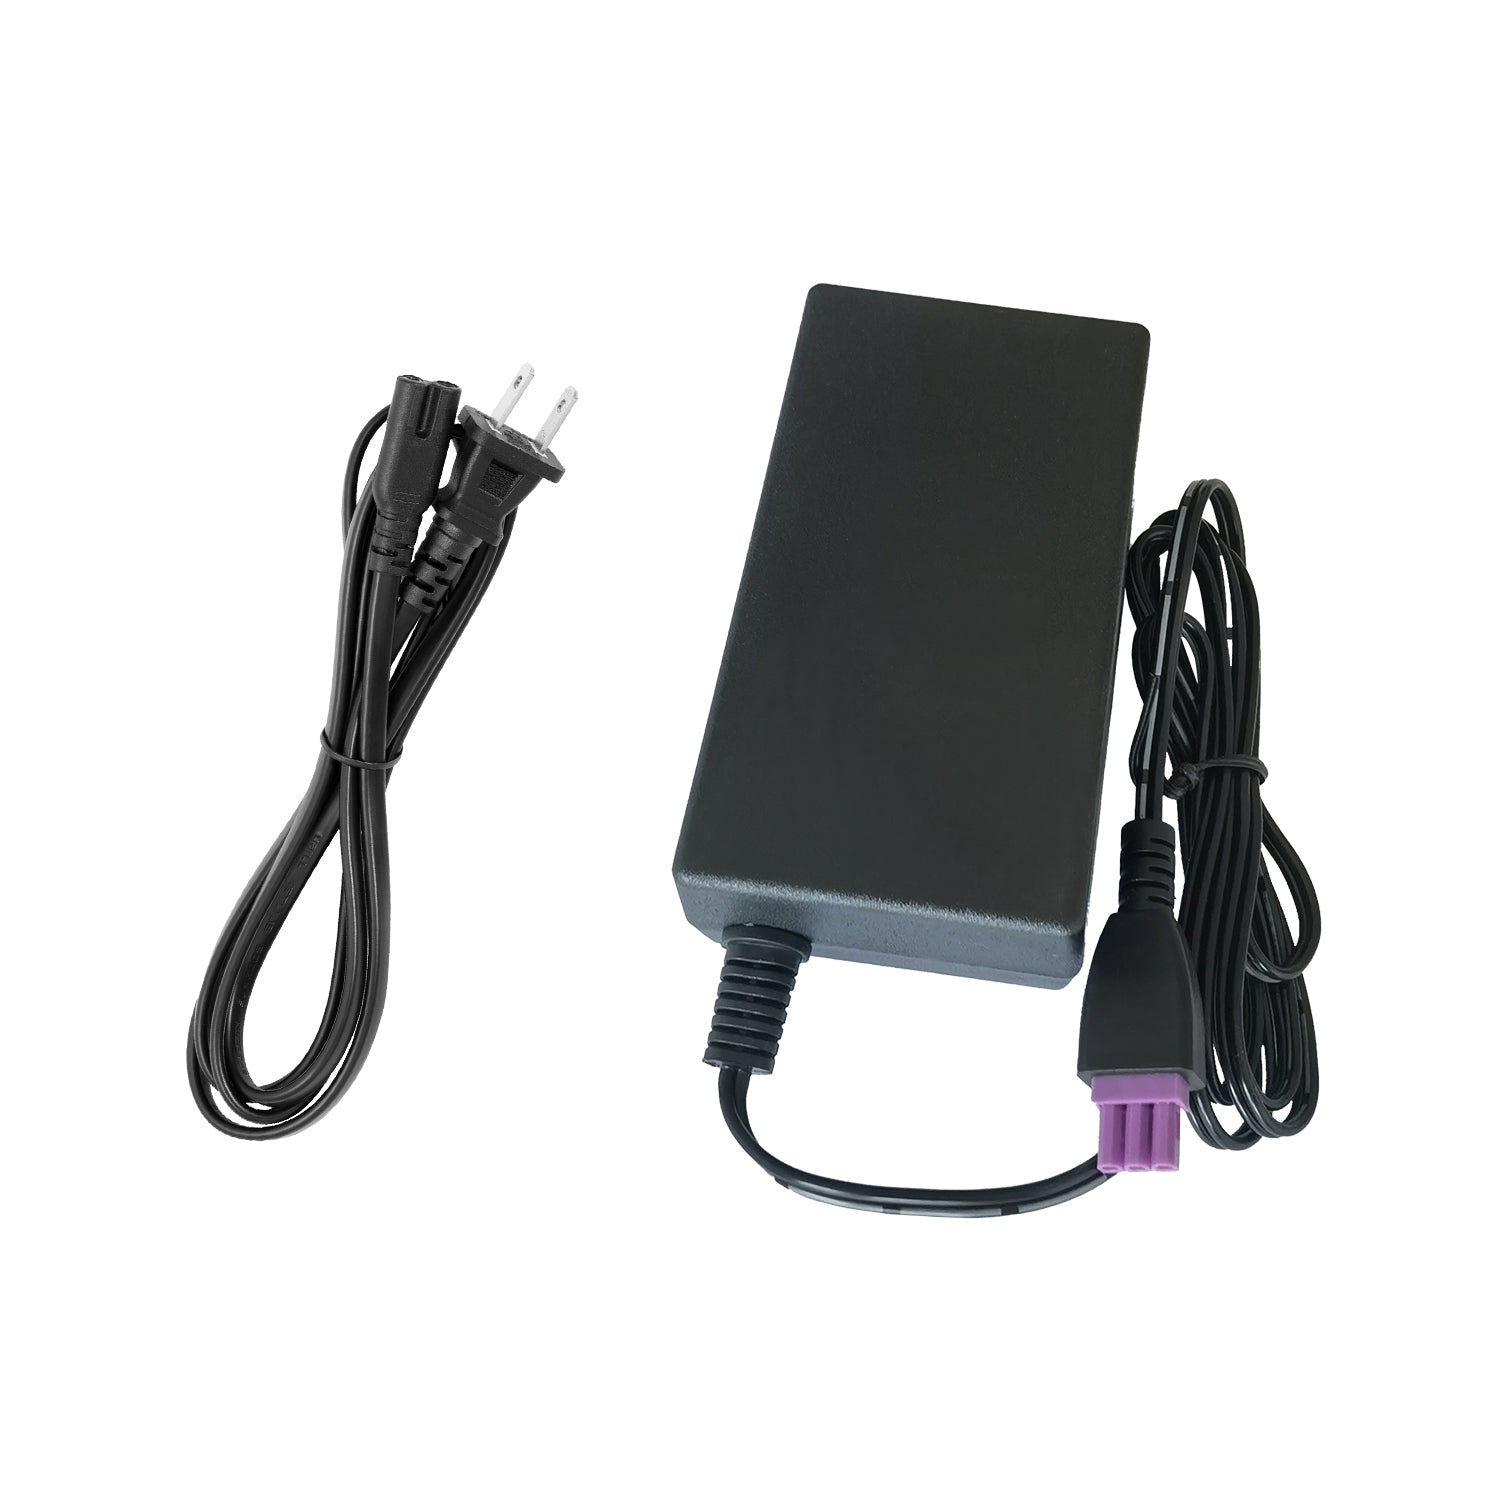 Power Adapter for HP Printer 0957-2105.